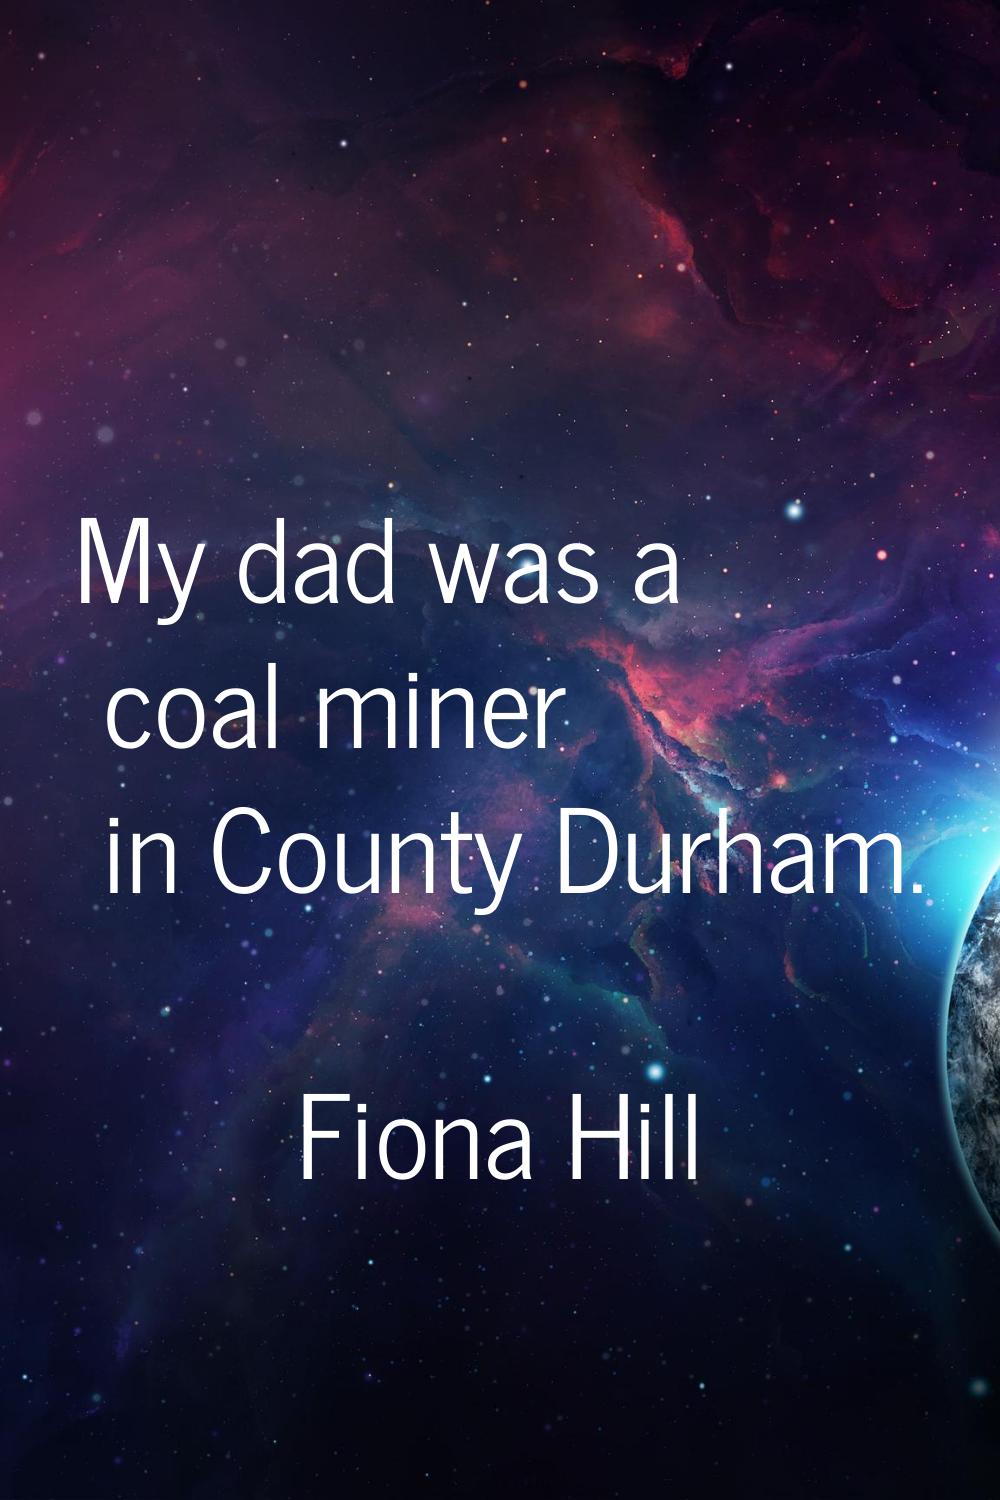 My dad was a coal miner in County Durham.